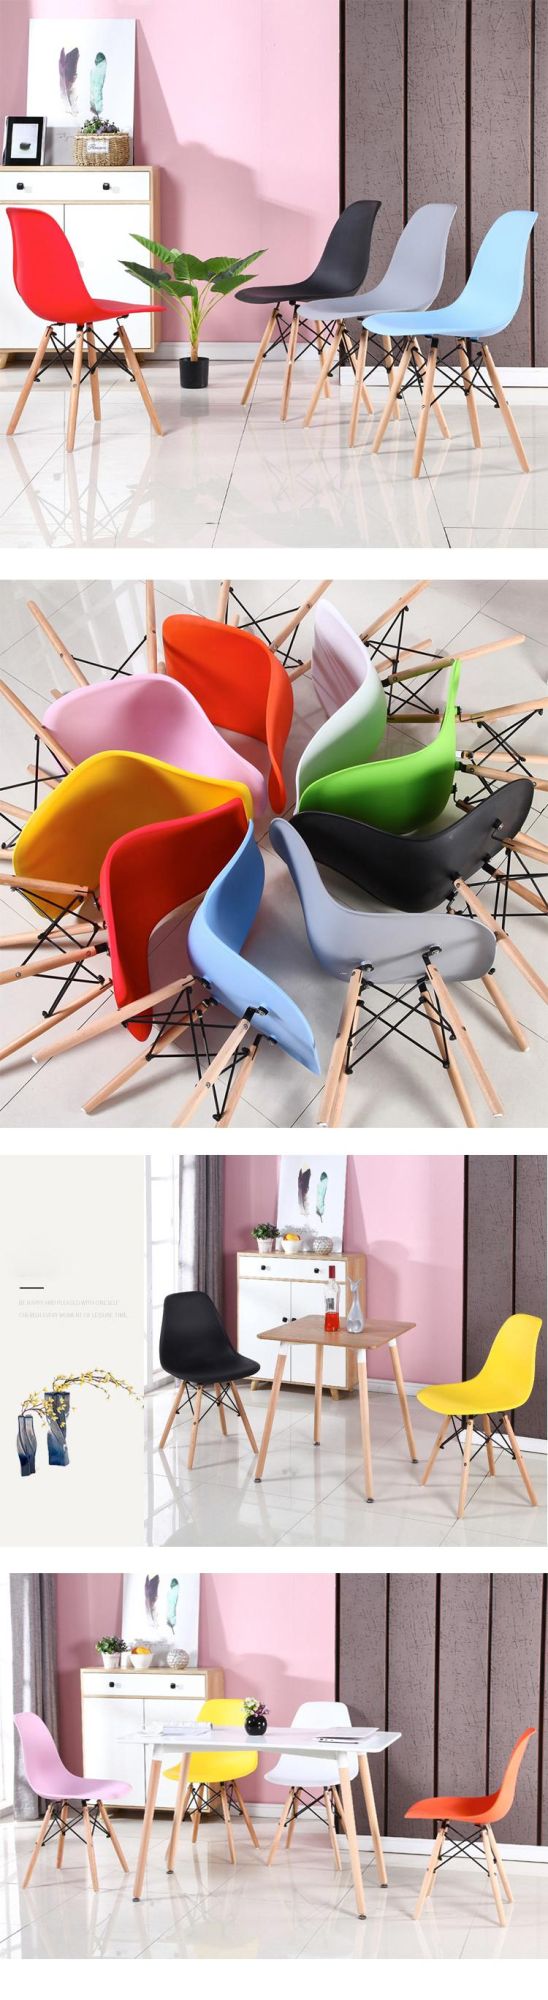 Hot Selling Home Hotel Living Room Furniture Plastic Colorful Dining Chair with Wooden Legs for Banquet Wedding Party